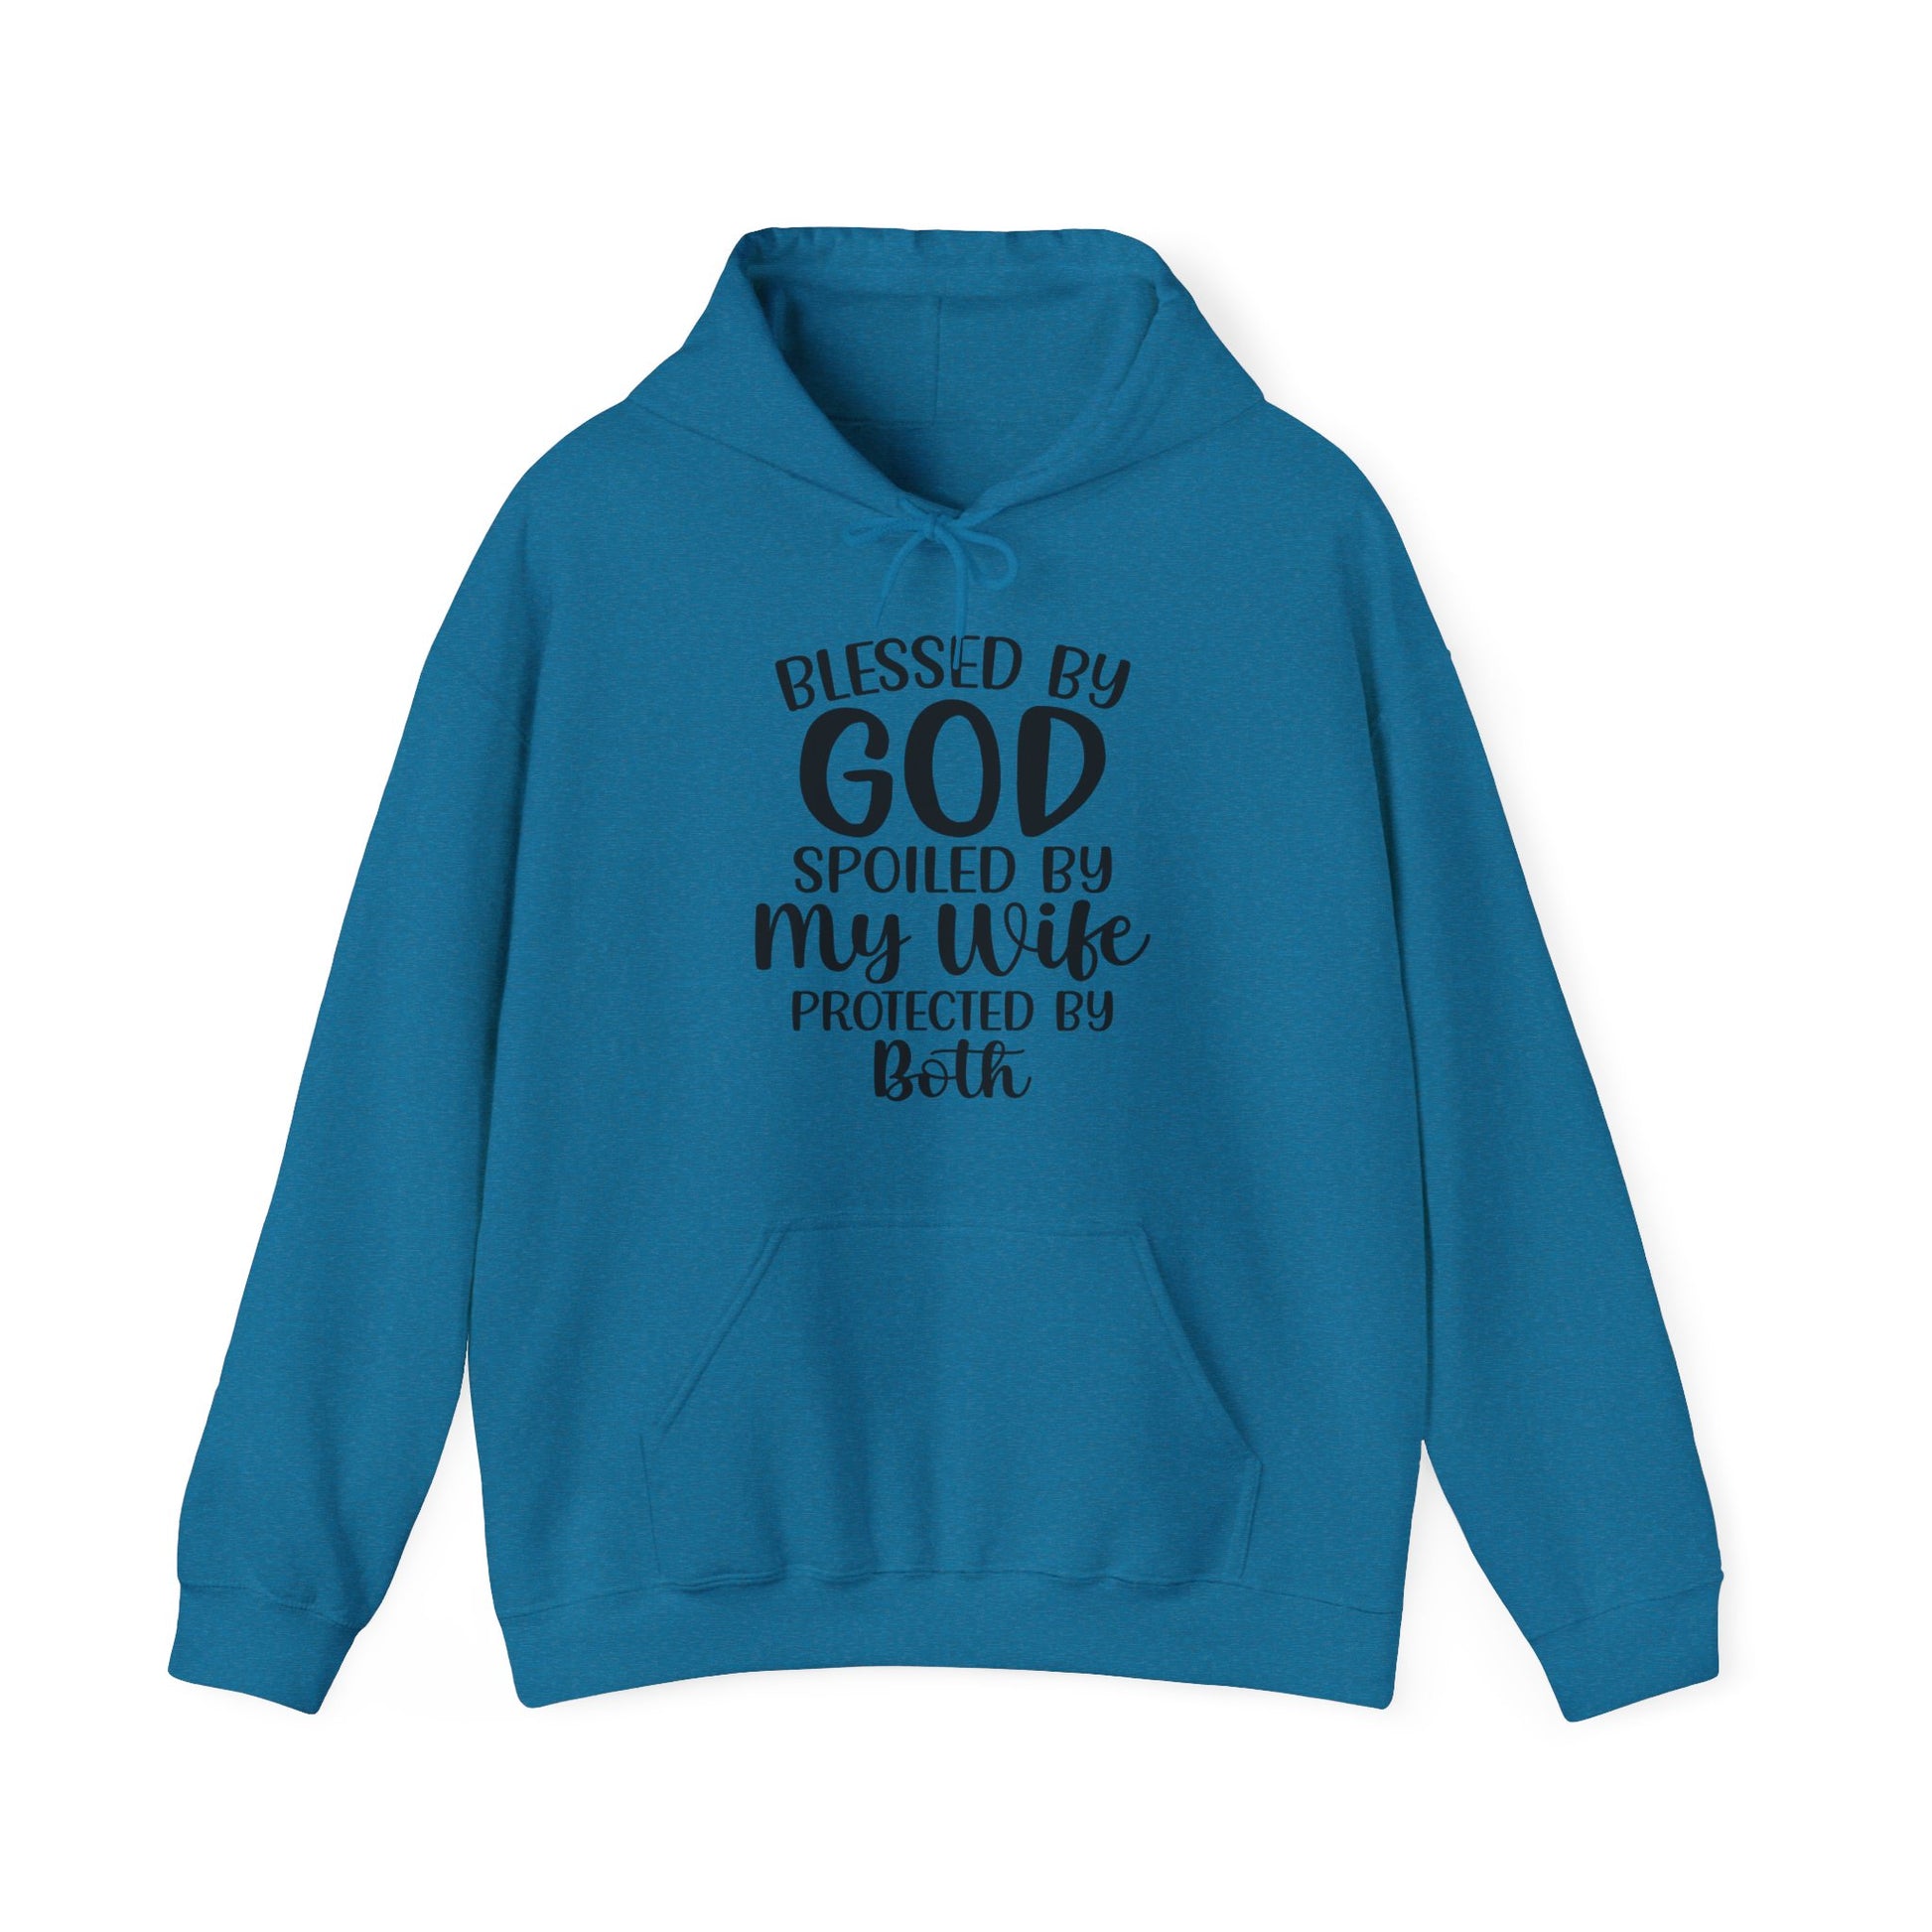 Blessed By God Spoiled By My Wife Protected By Both Men's Christian Hooded Sweatshirt Printify